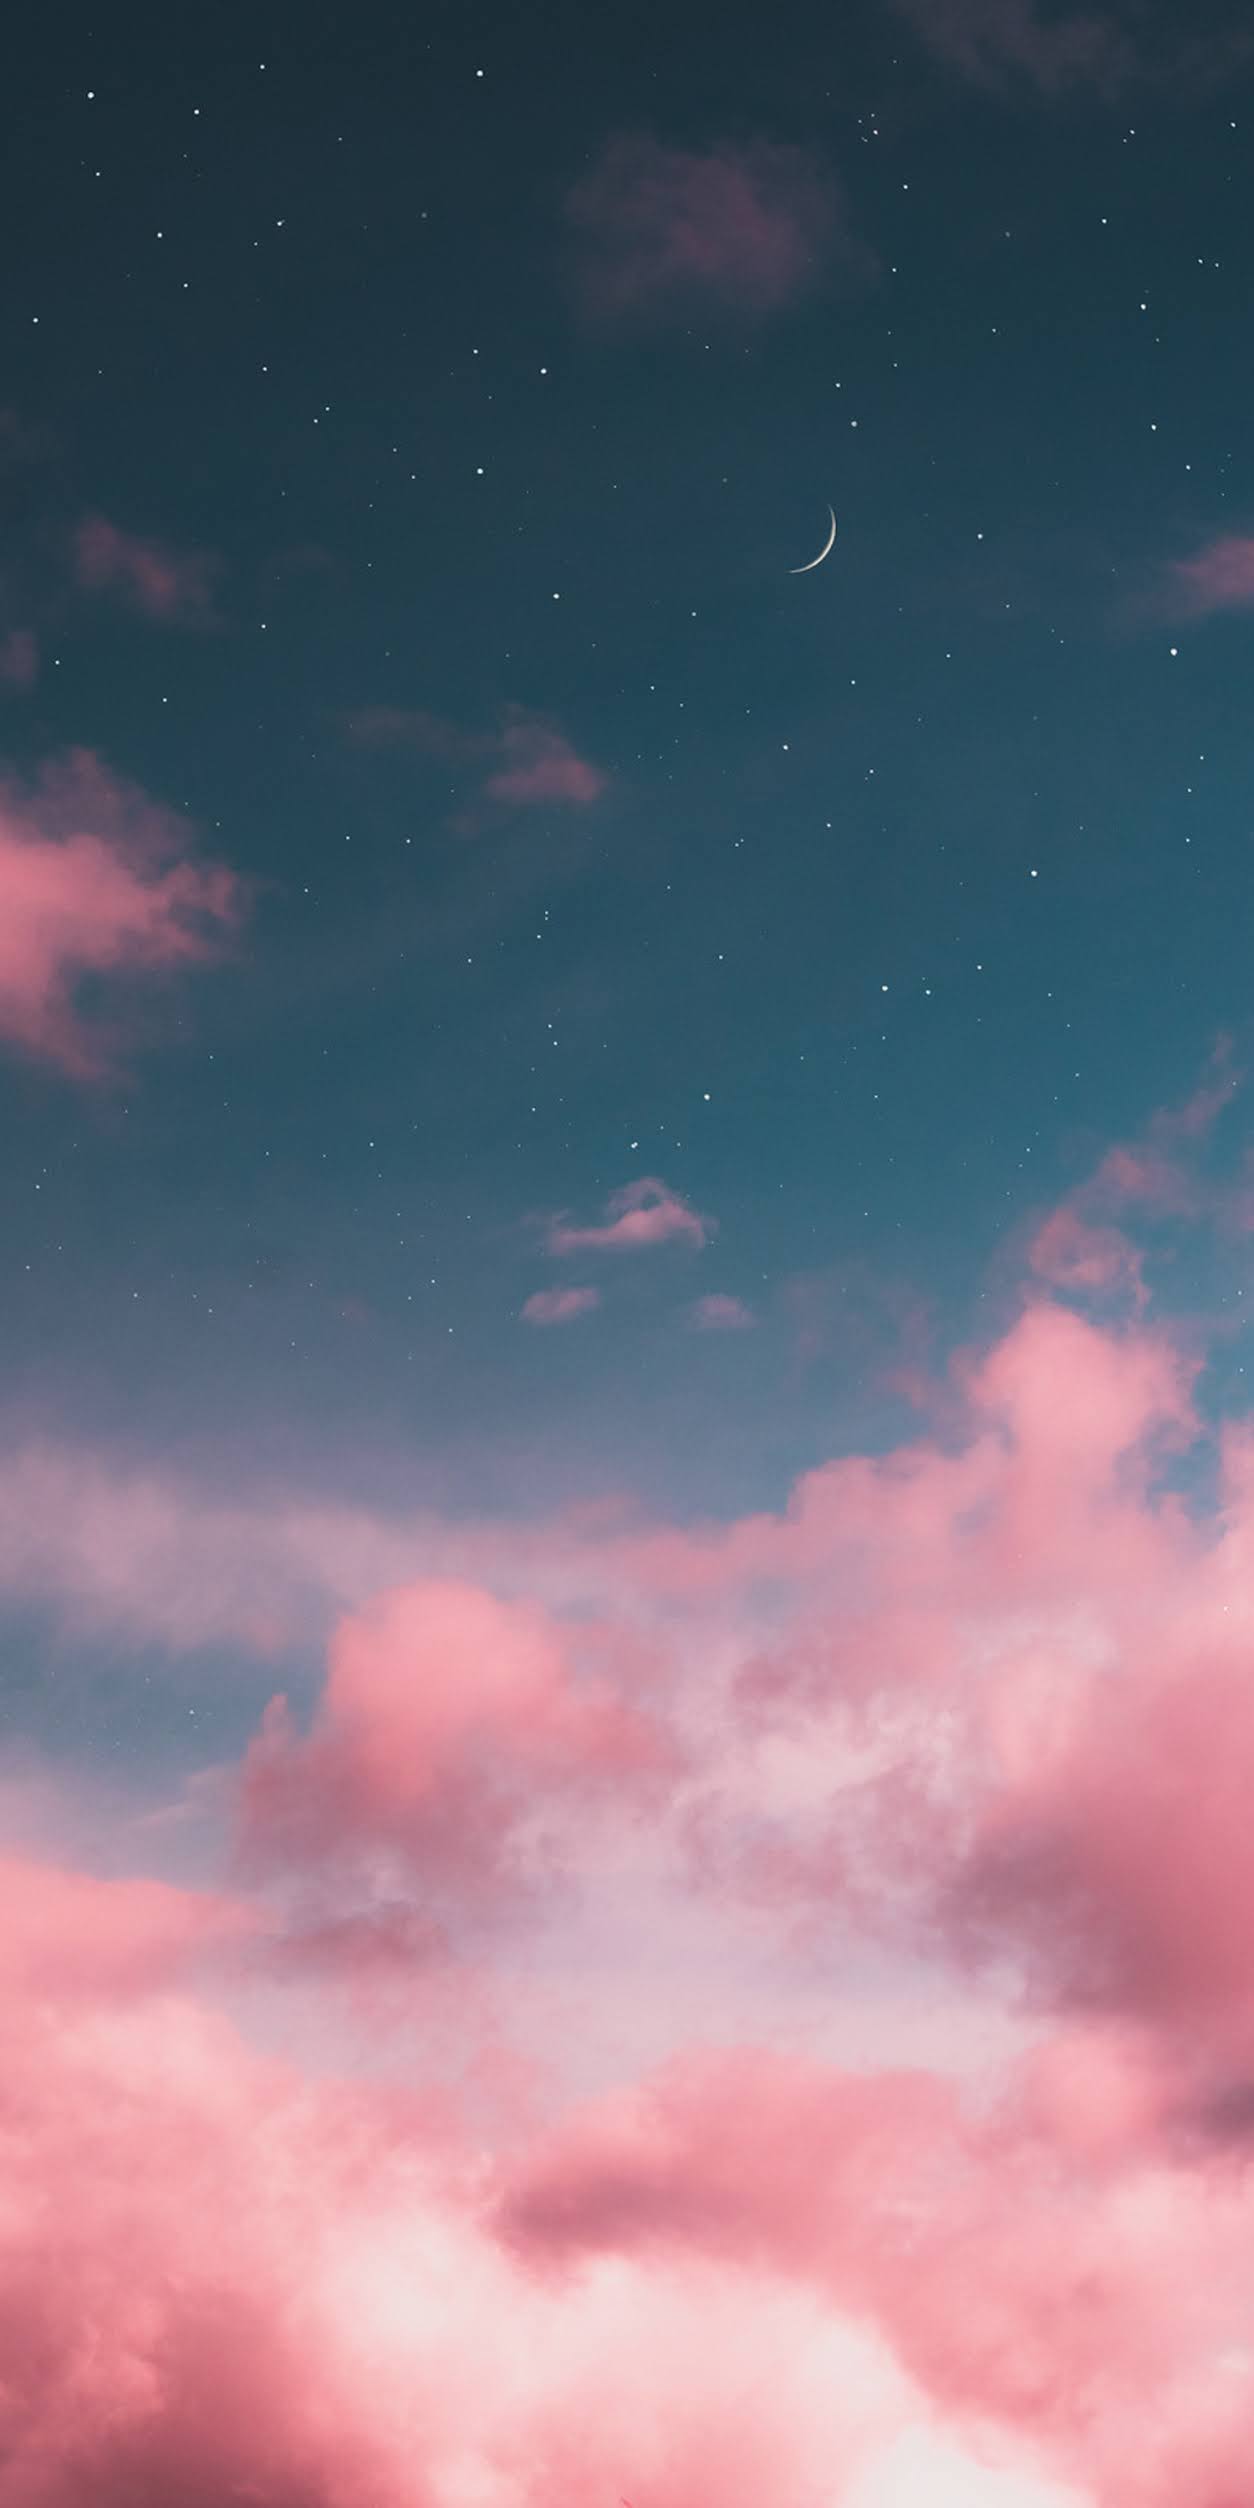 Moon in the aesthetic pink sky